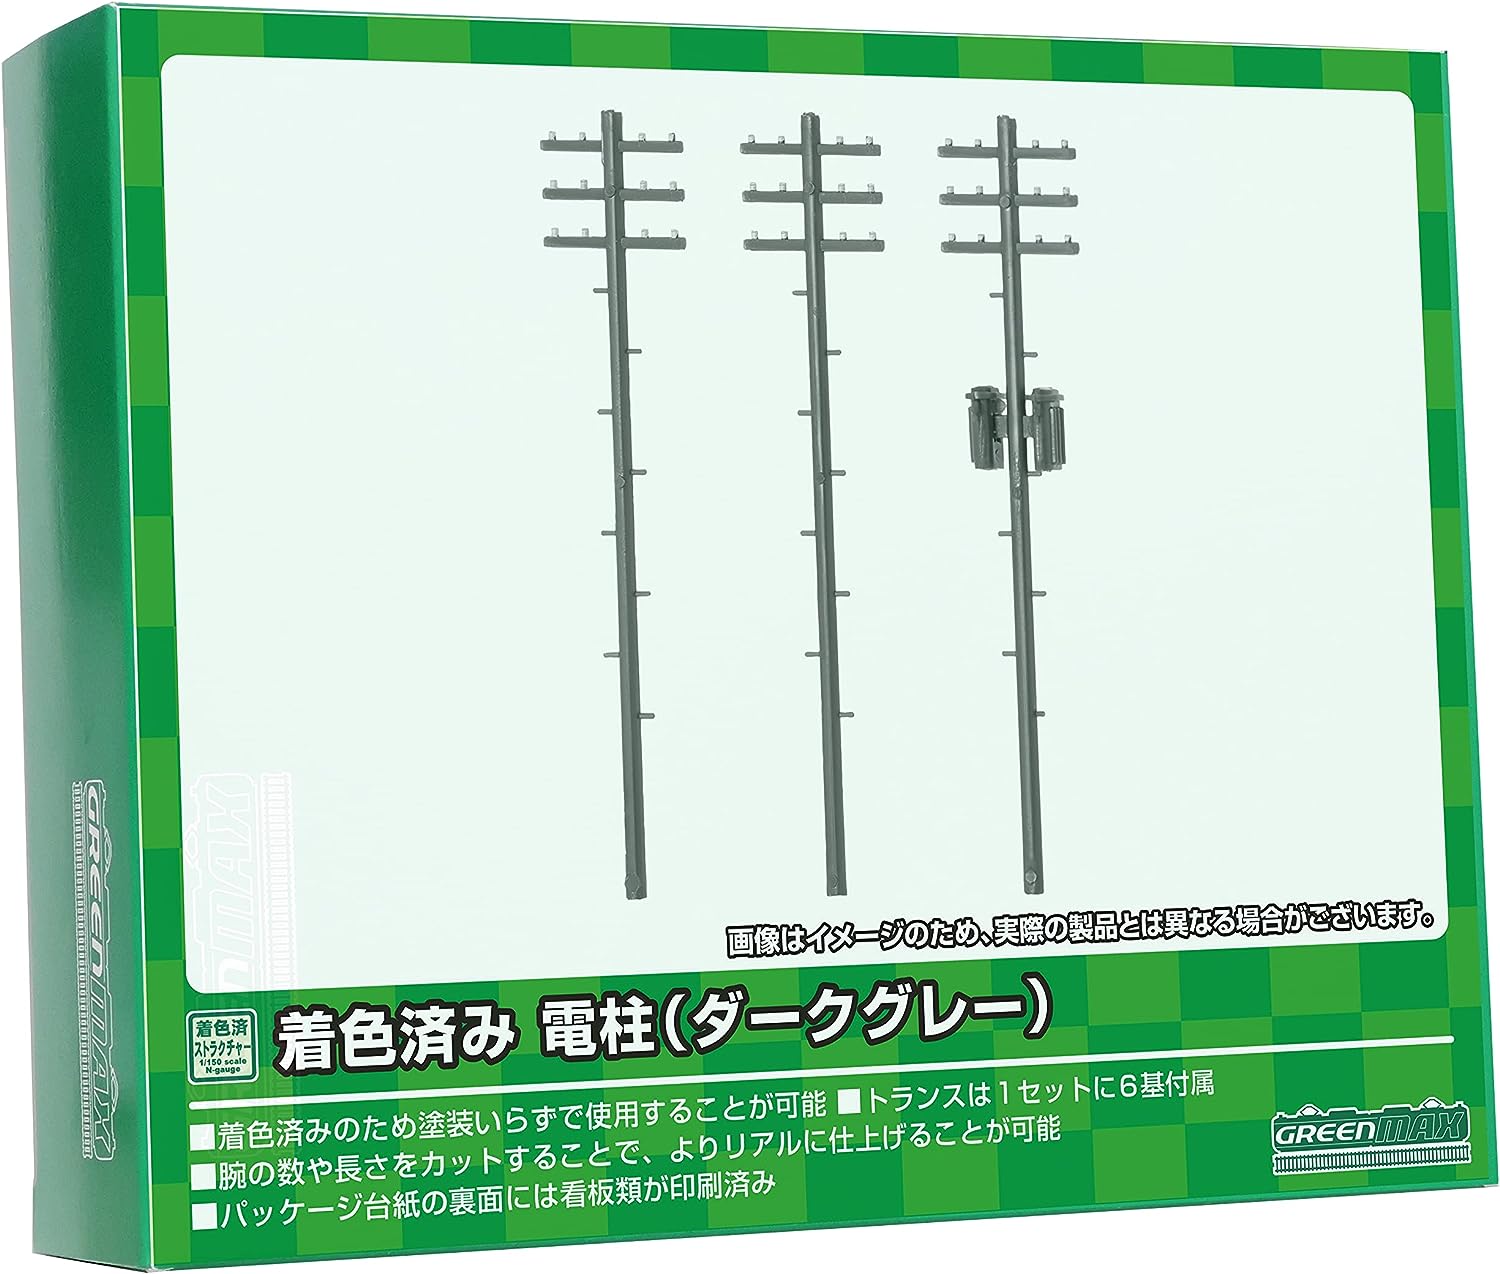 Greenmax 2626 N Gauge Poles Dark Gray Pre-Colored Assembly Kit Railway Model Structure - BanzaiHobby